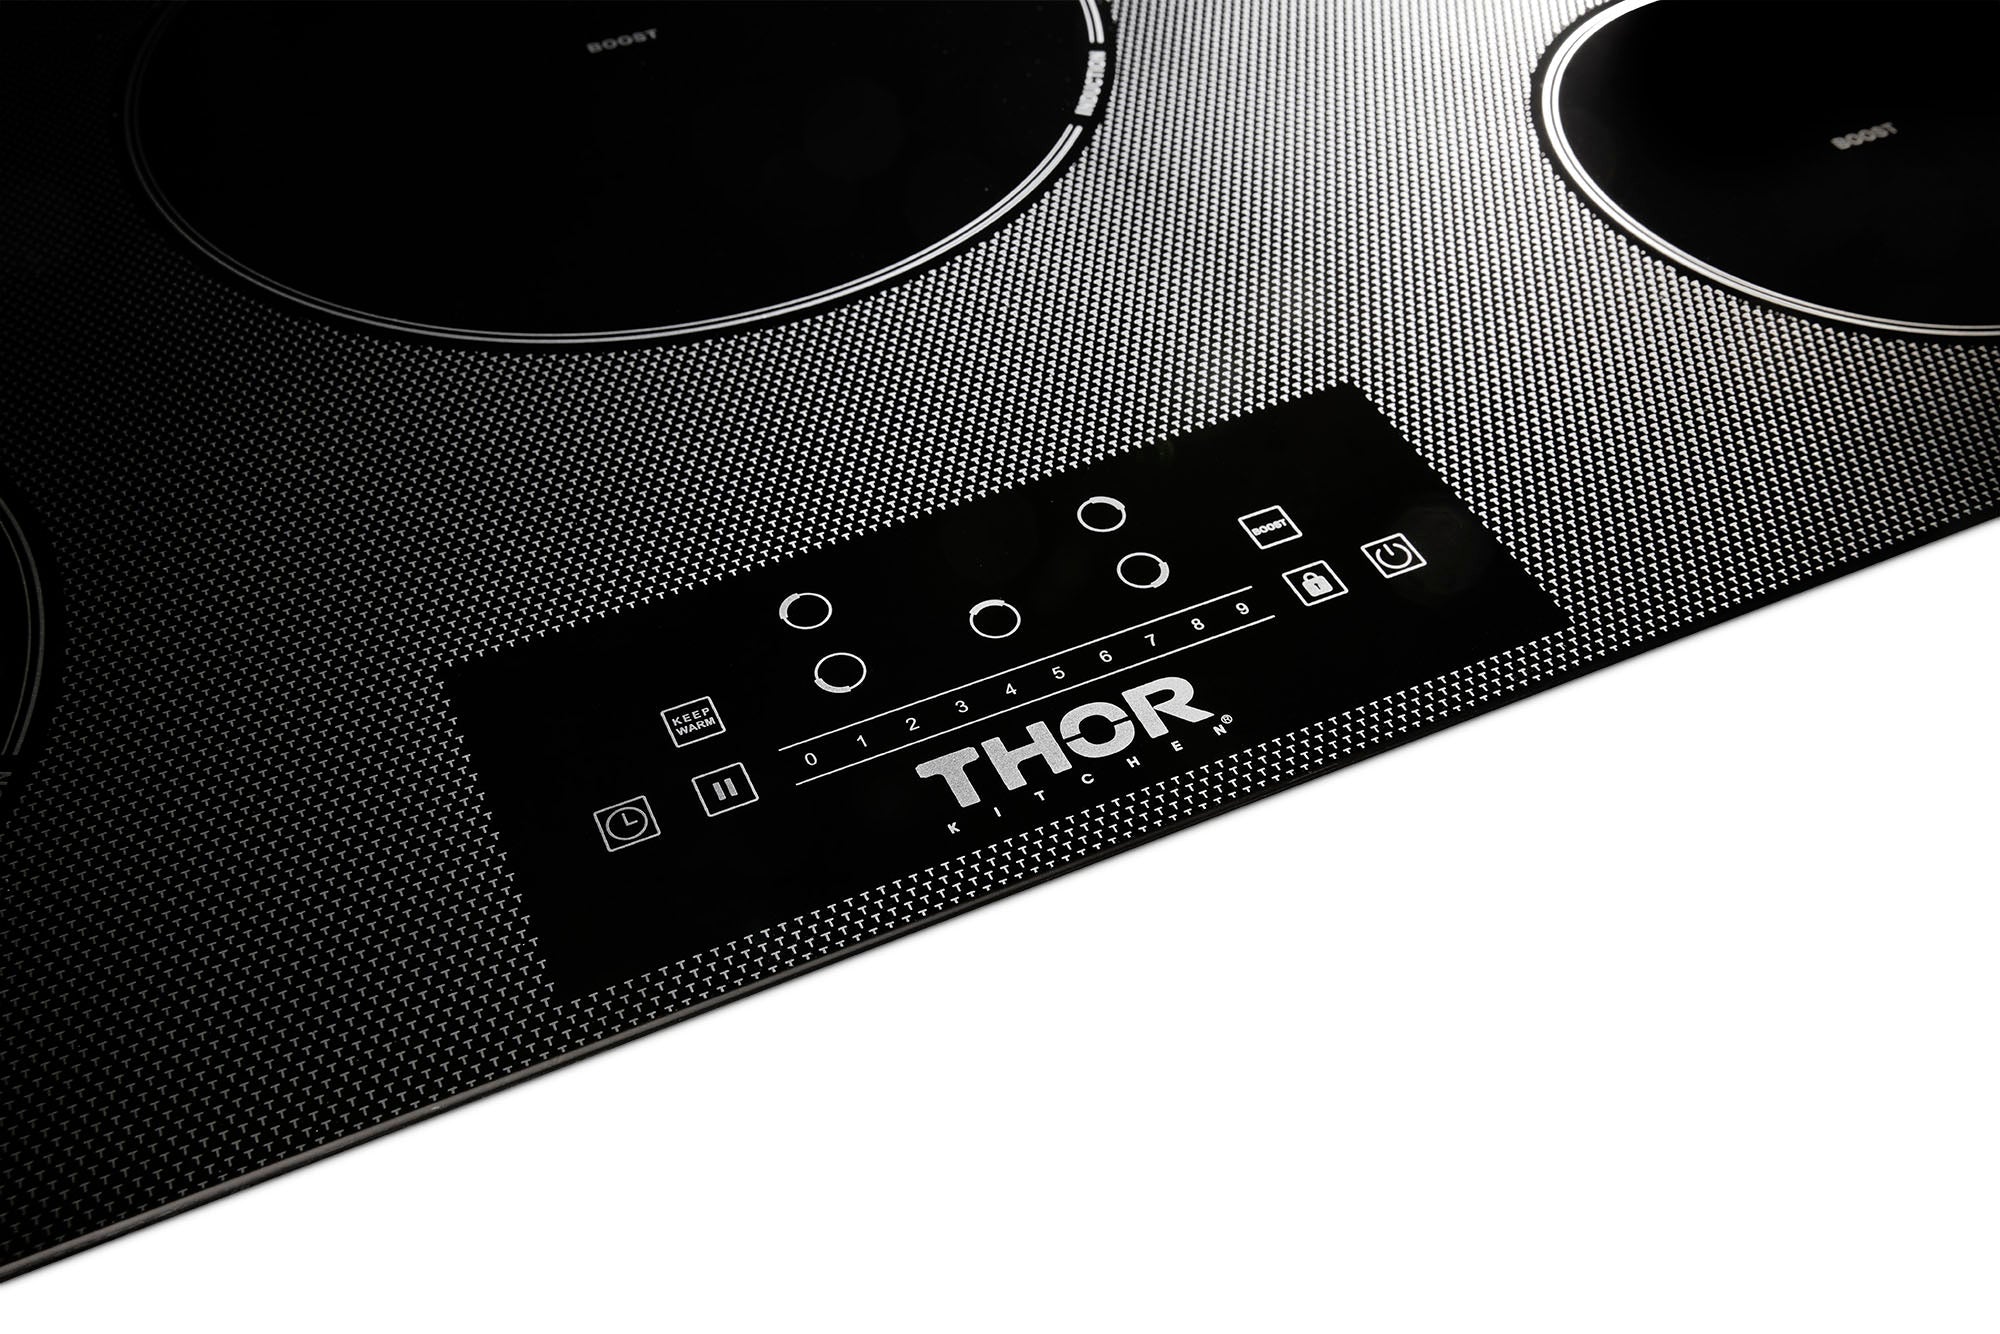 Thor Kitchen 36 Inch Built-In Induction Cooktop with 5 Elements -Model TIH36